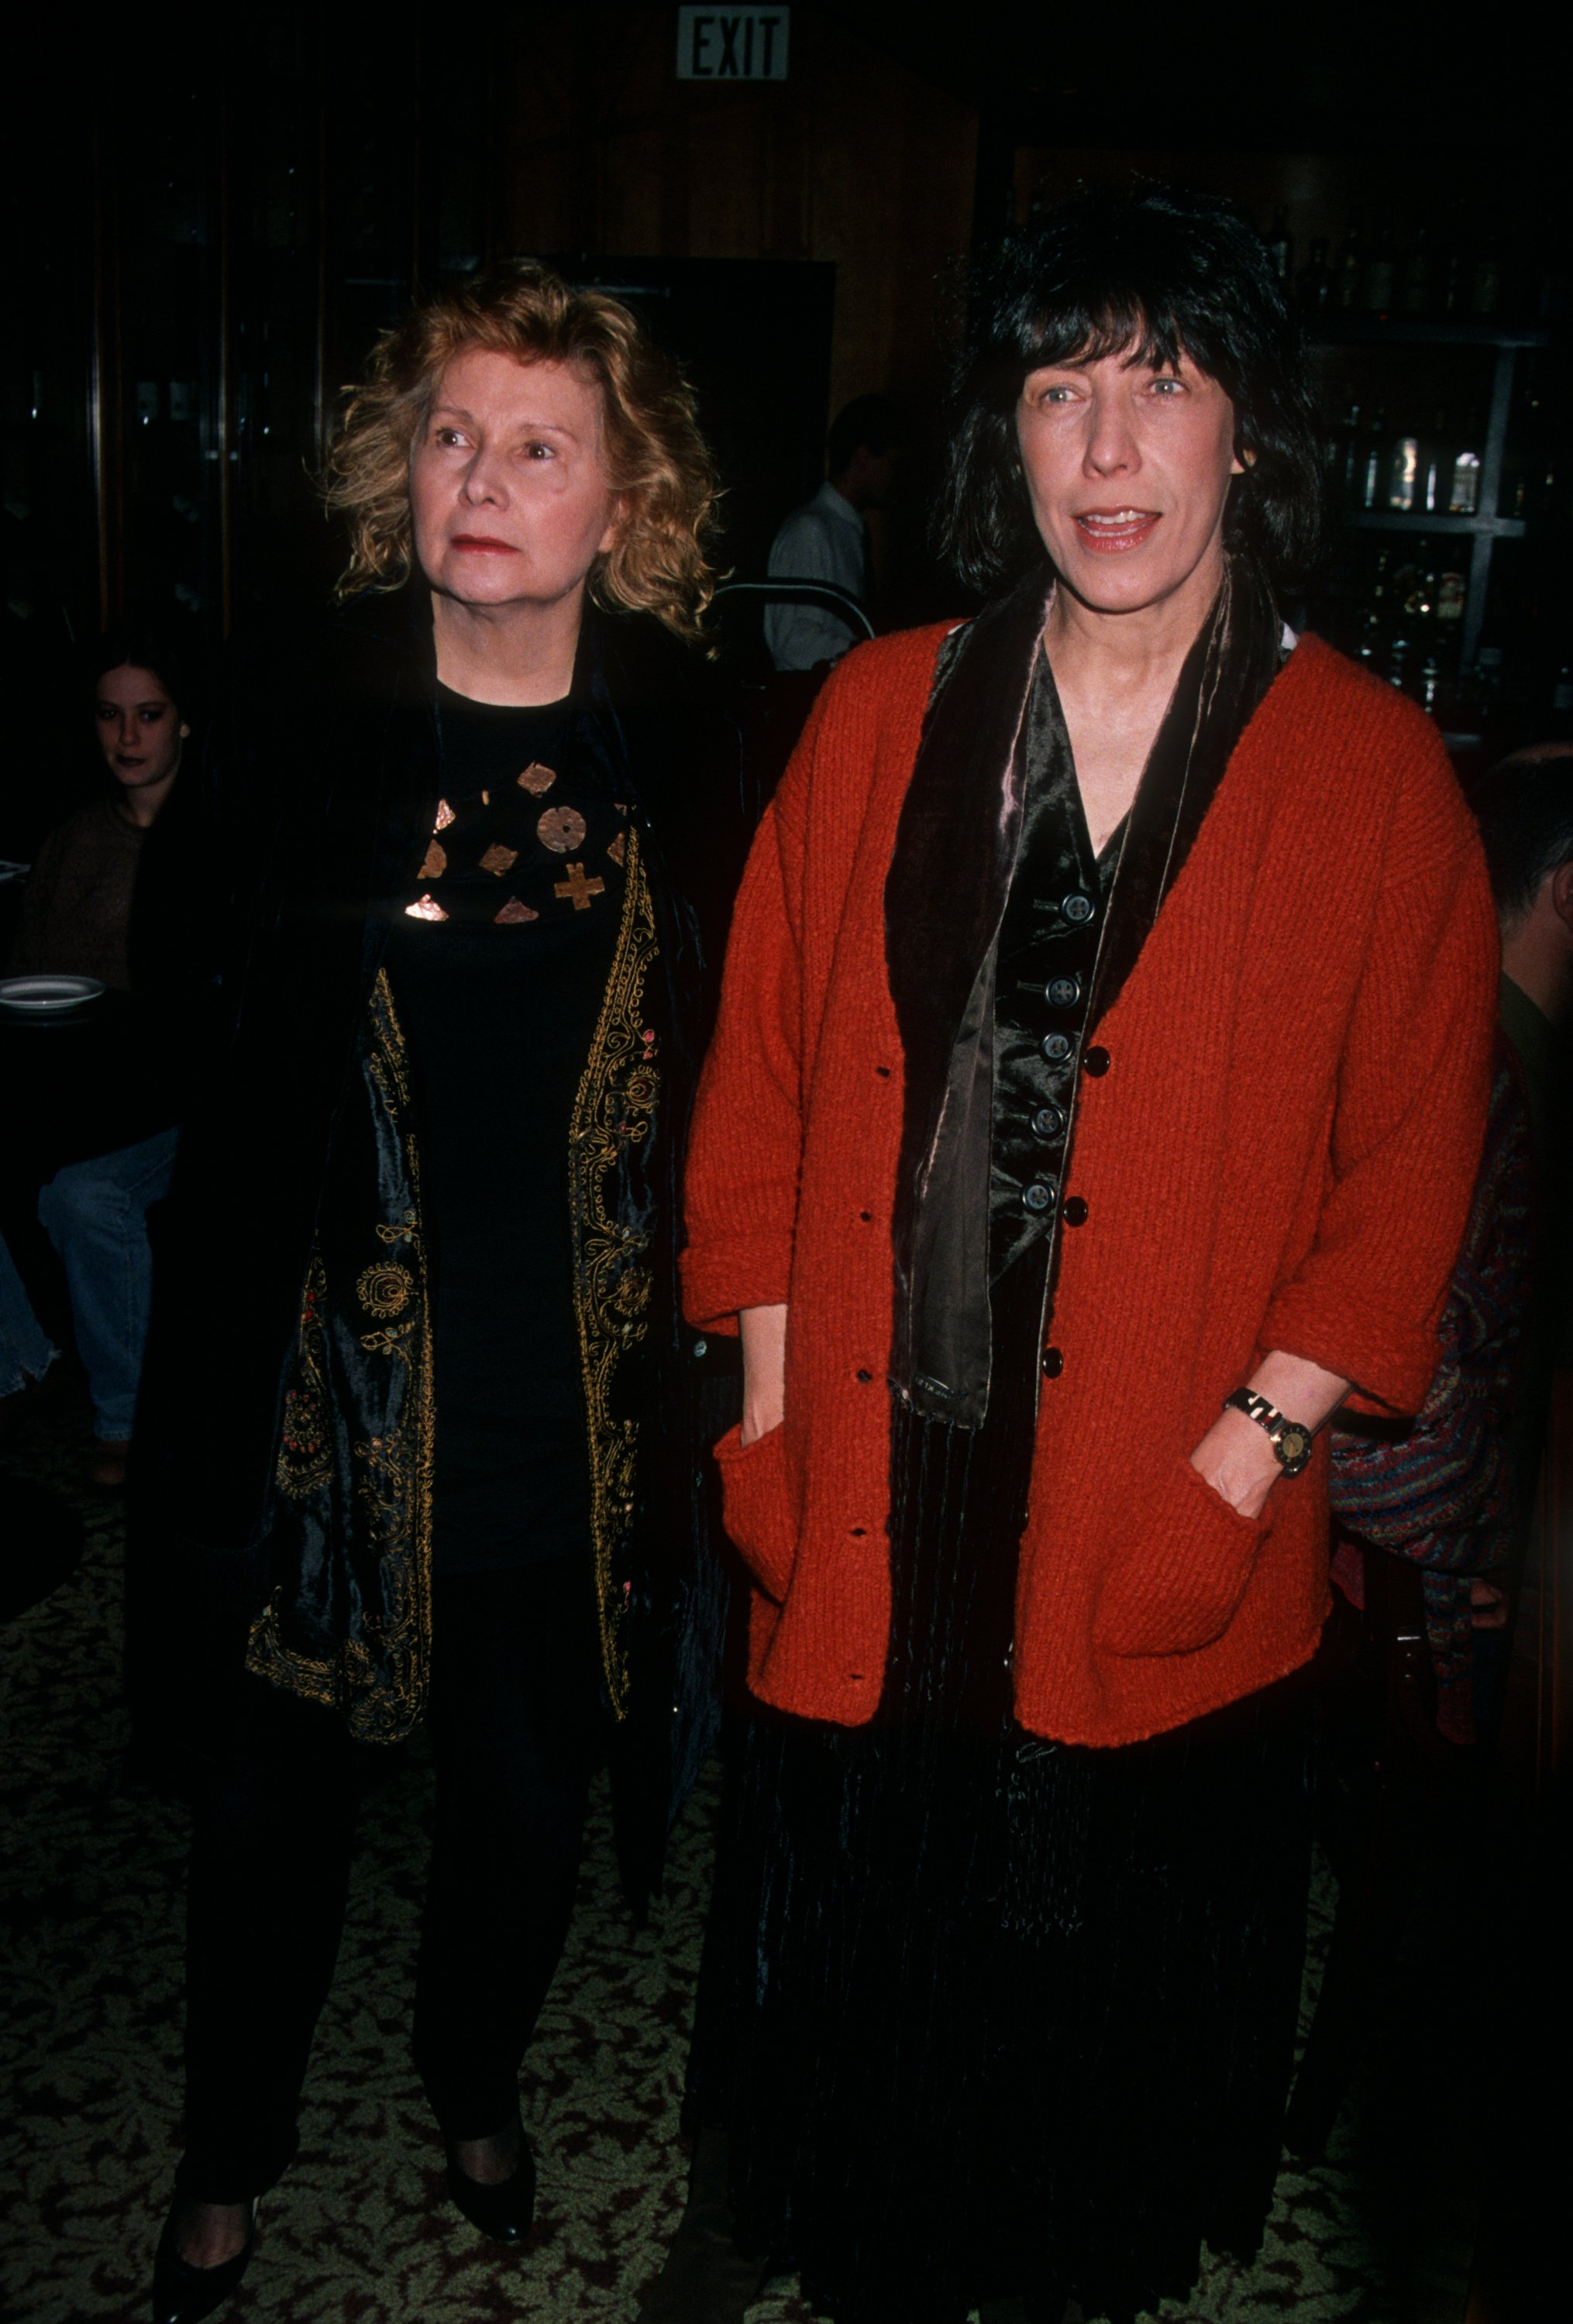 Jane Wagner and Lily Tomlin at an In-Store Appearance Signing of "Edith Ann-My Life So Far" on October 23, 1994, in West Hollywood, California. | Source: Ron Galella, Ltd./Ron Galella Collection/Getty Images